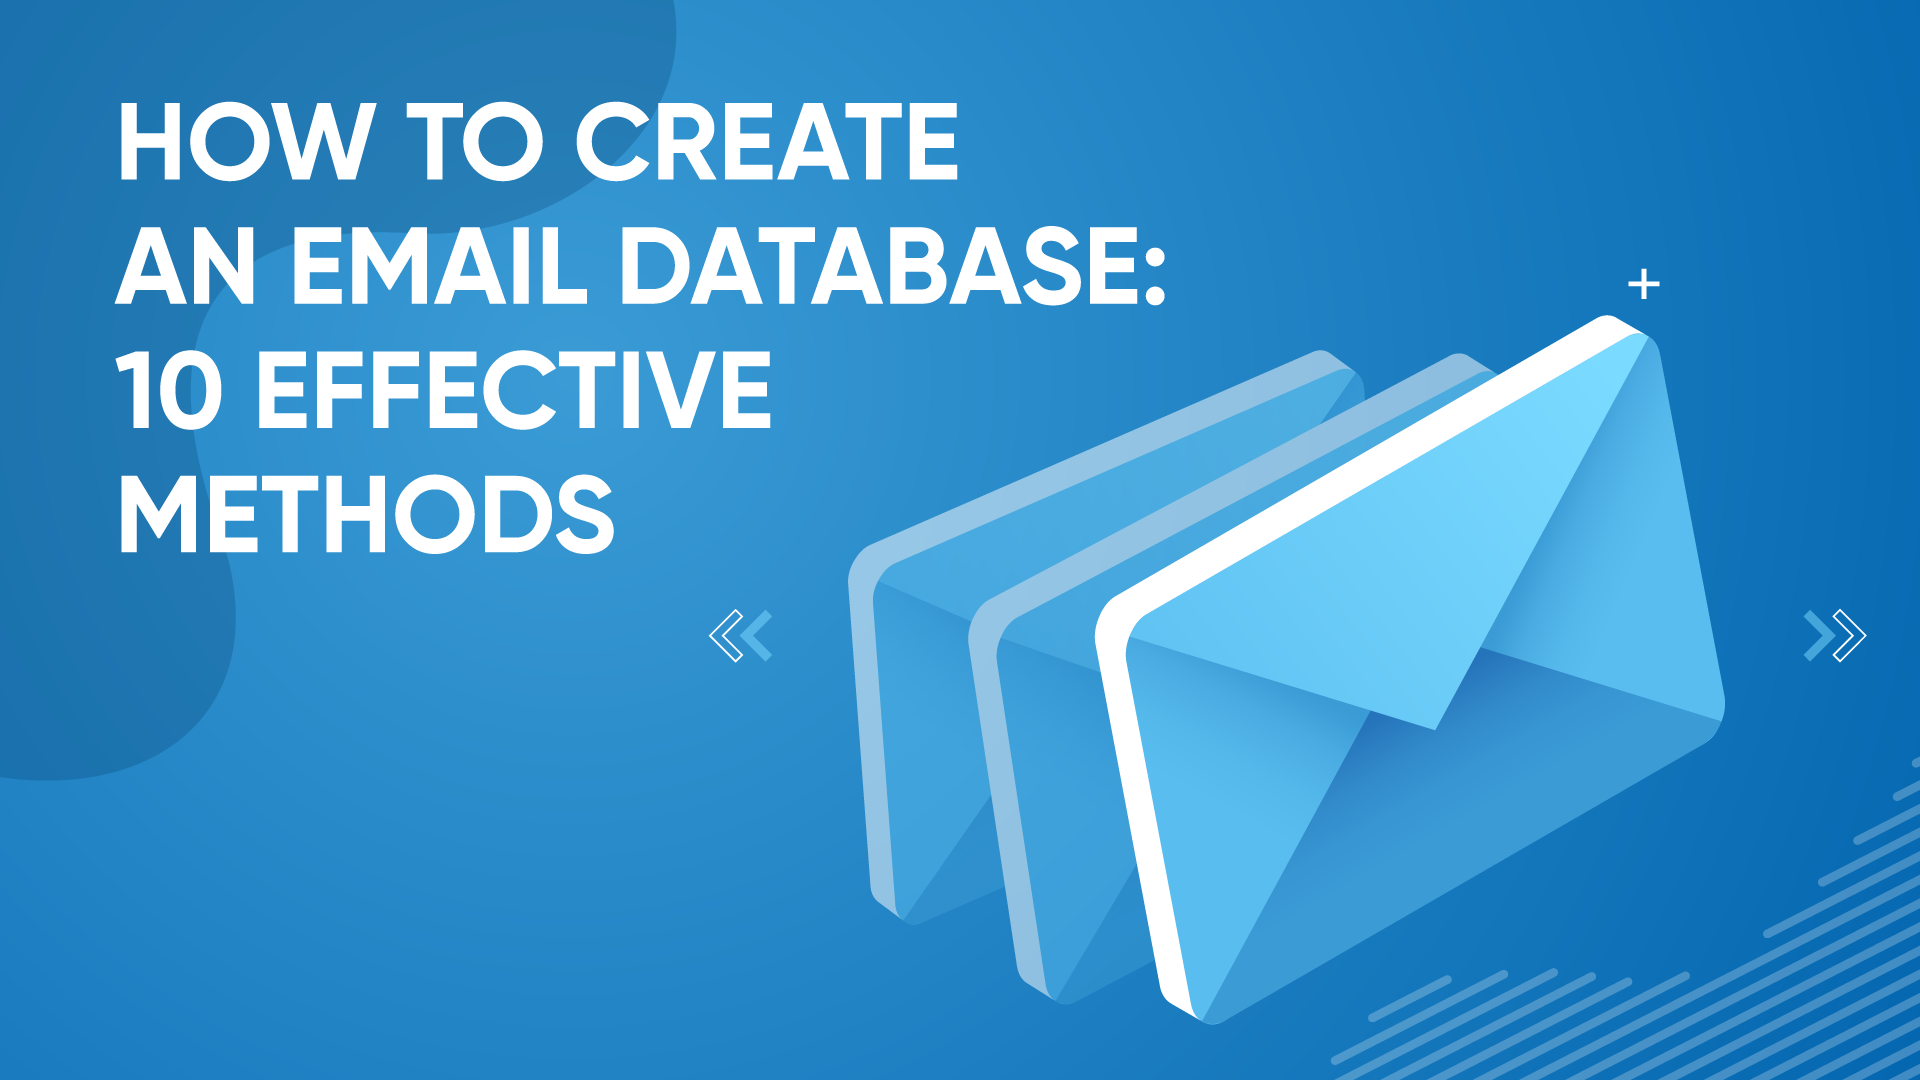 How to create an email database: 10 effective methods